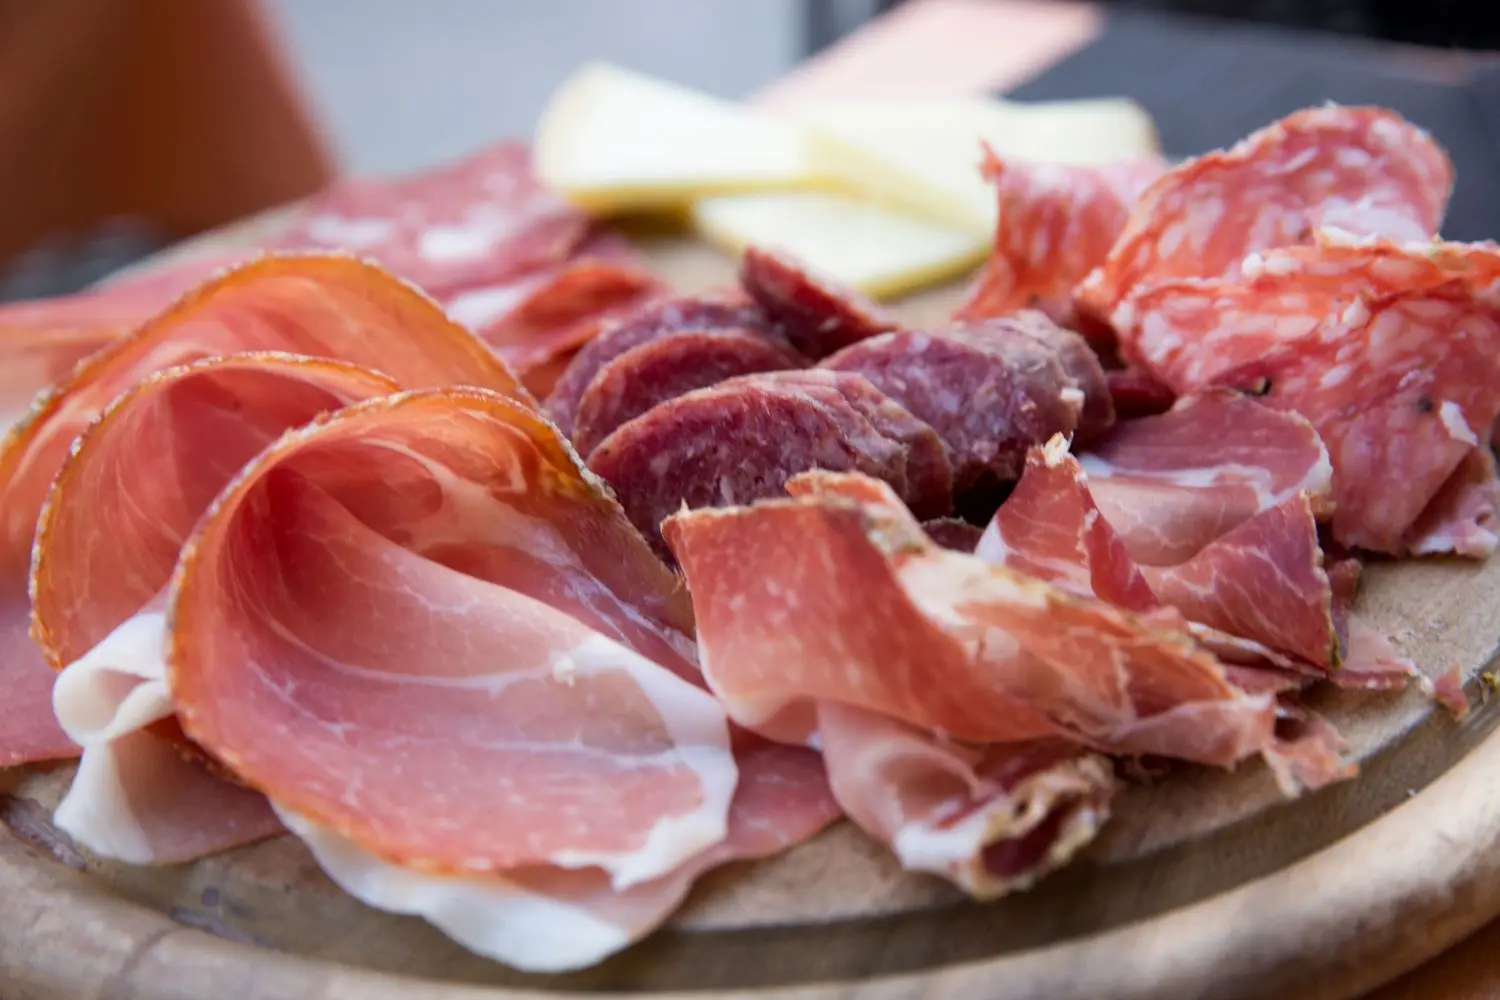 italian smoked raw meat - Is prosciutto a raw meat